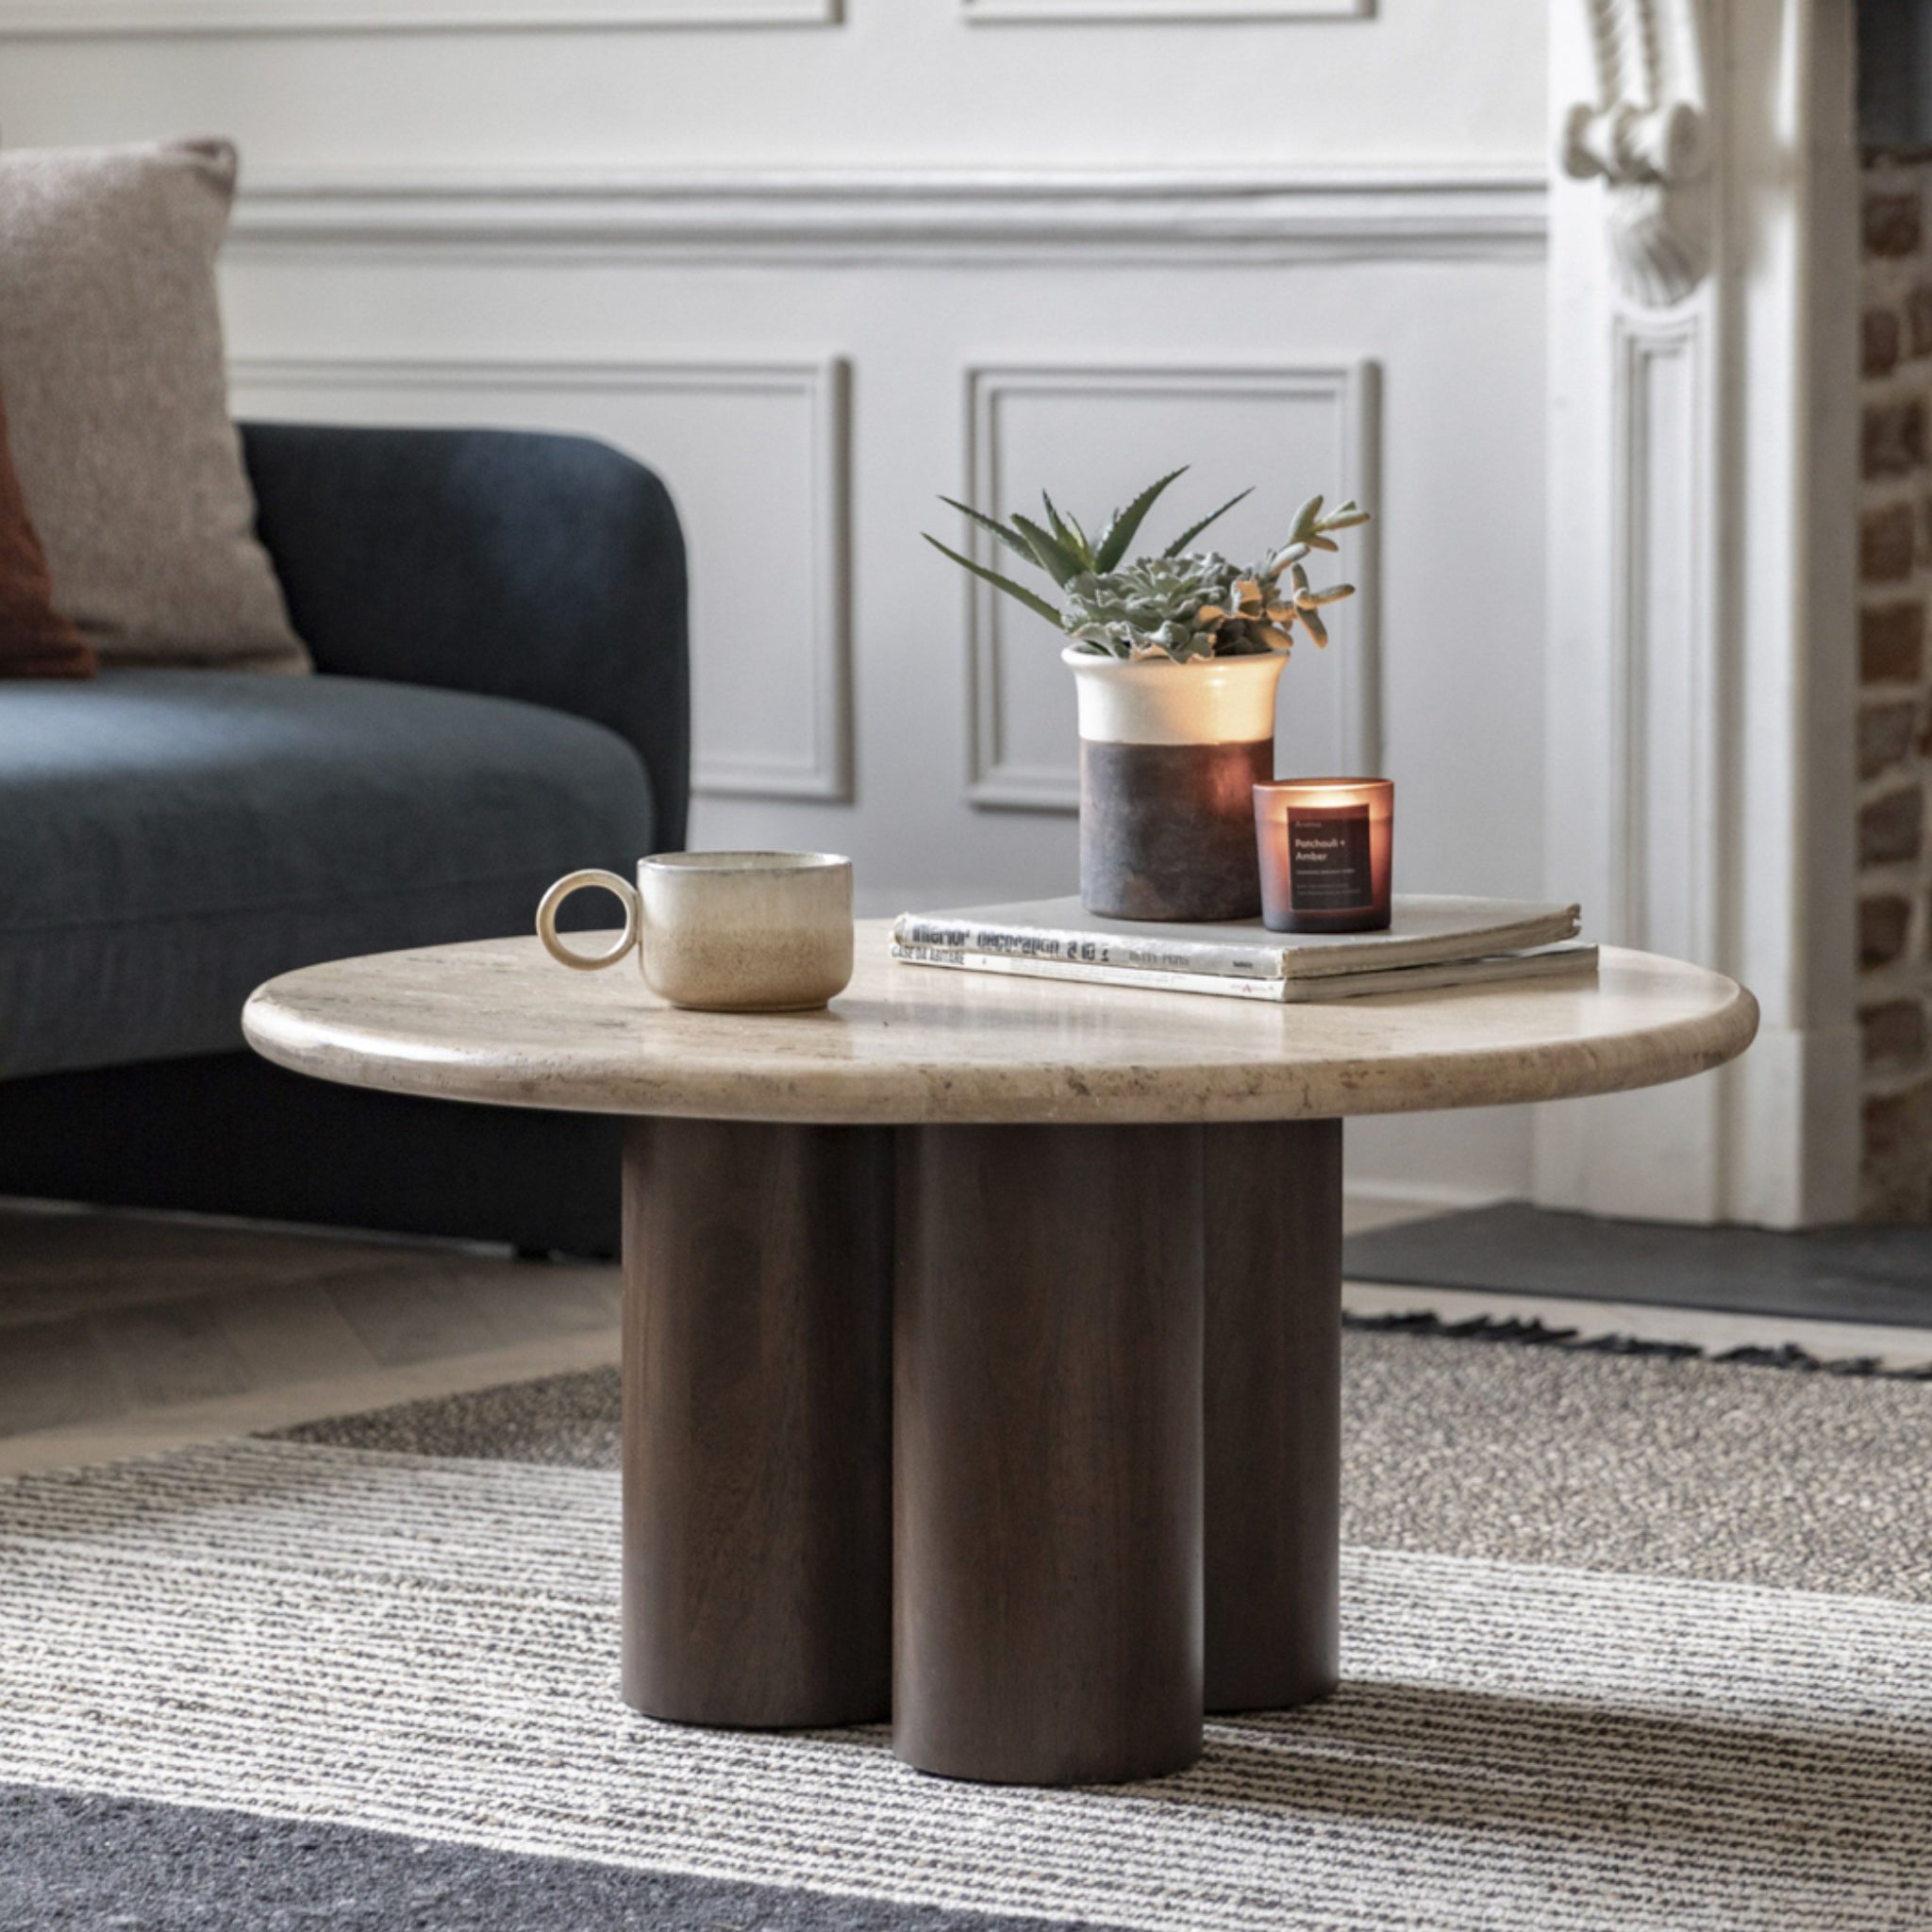 Mid Century Modern Inspired Coffee Table with Travertine Top - The Farthing